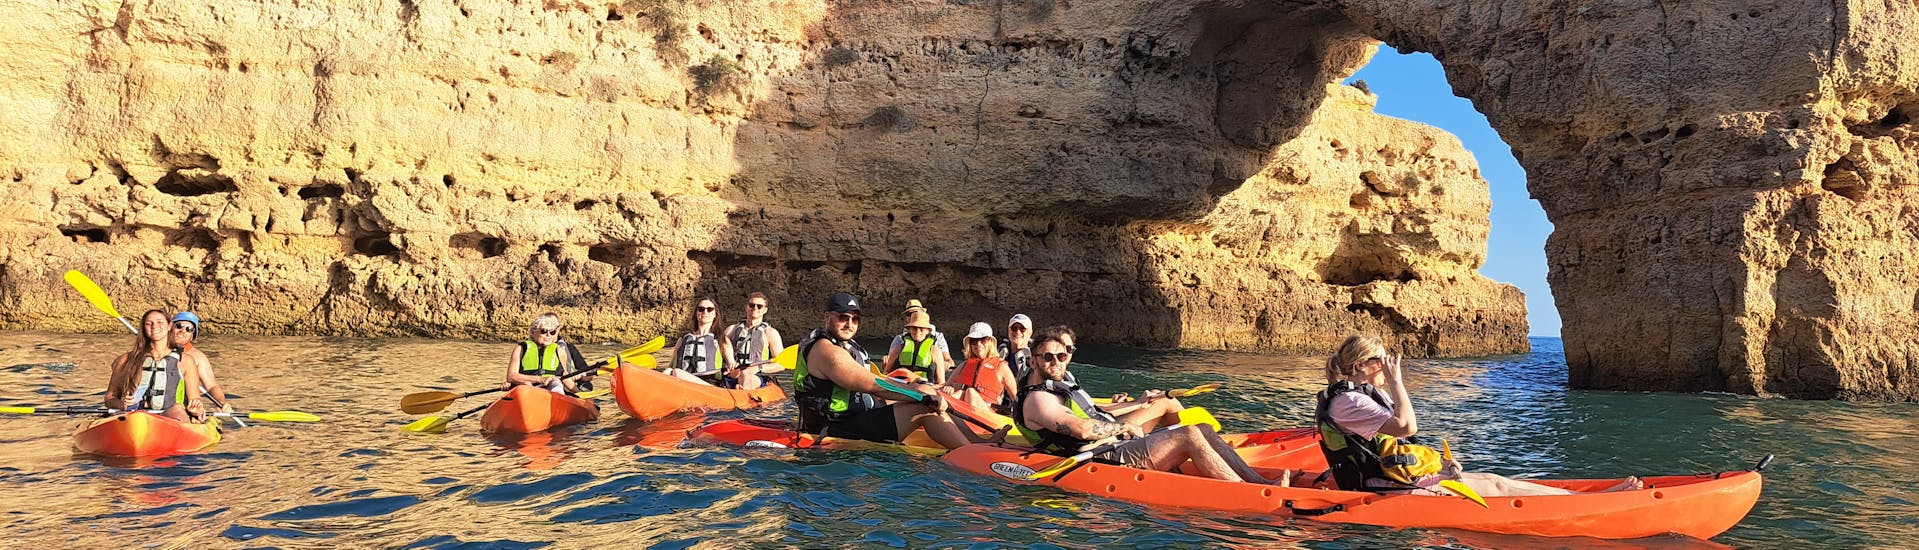 Private Sunrise Kayak Tour to the Benagil Caves and Marinha beach from Albandeira with Albandeira Ecotours.